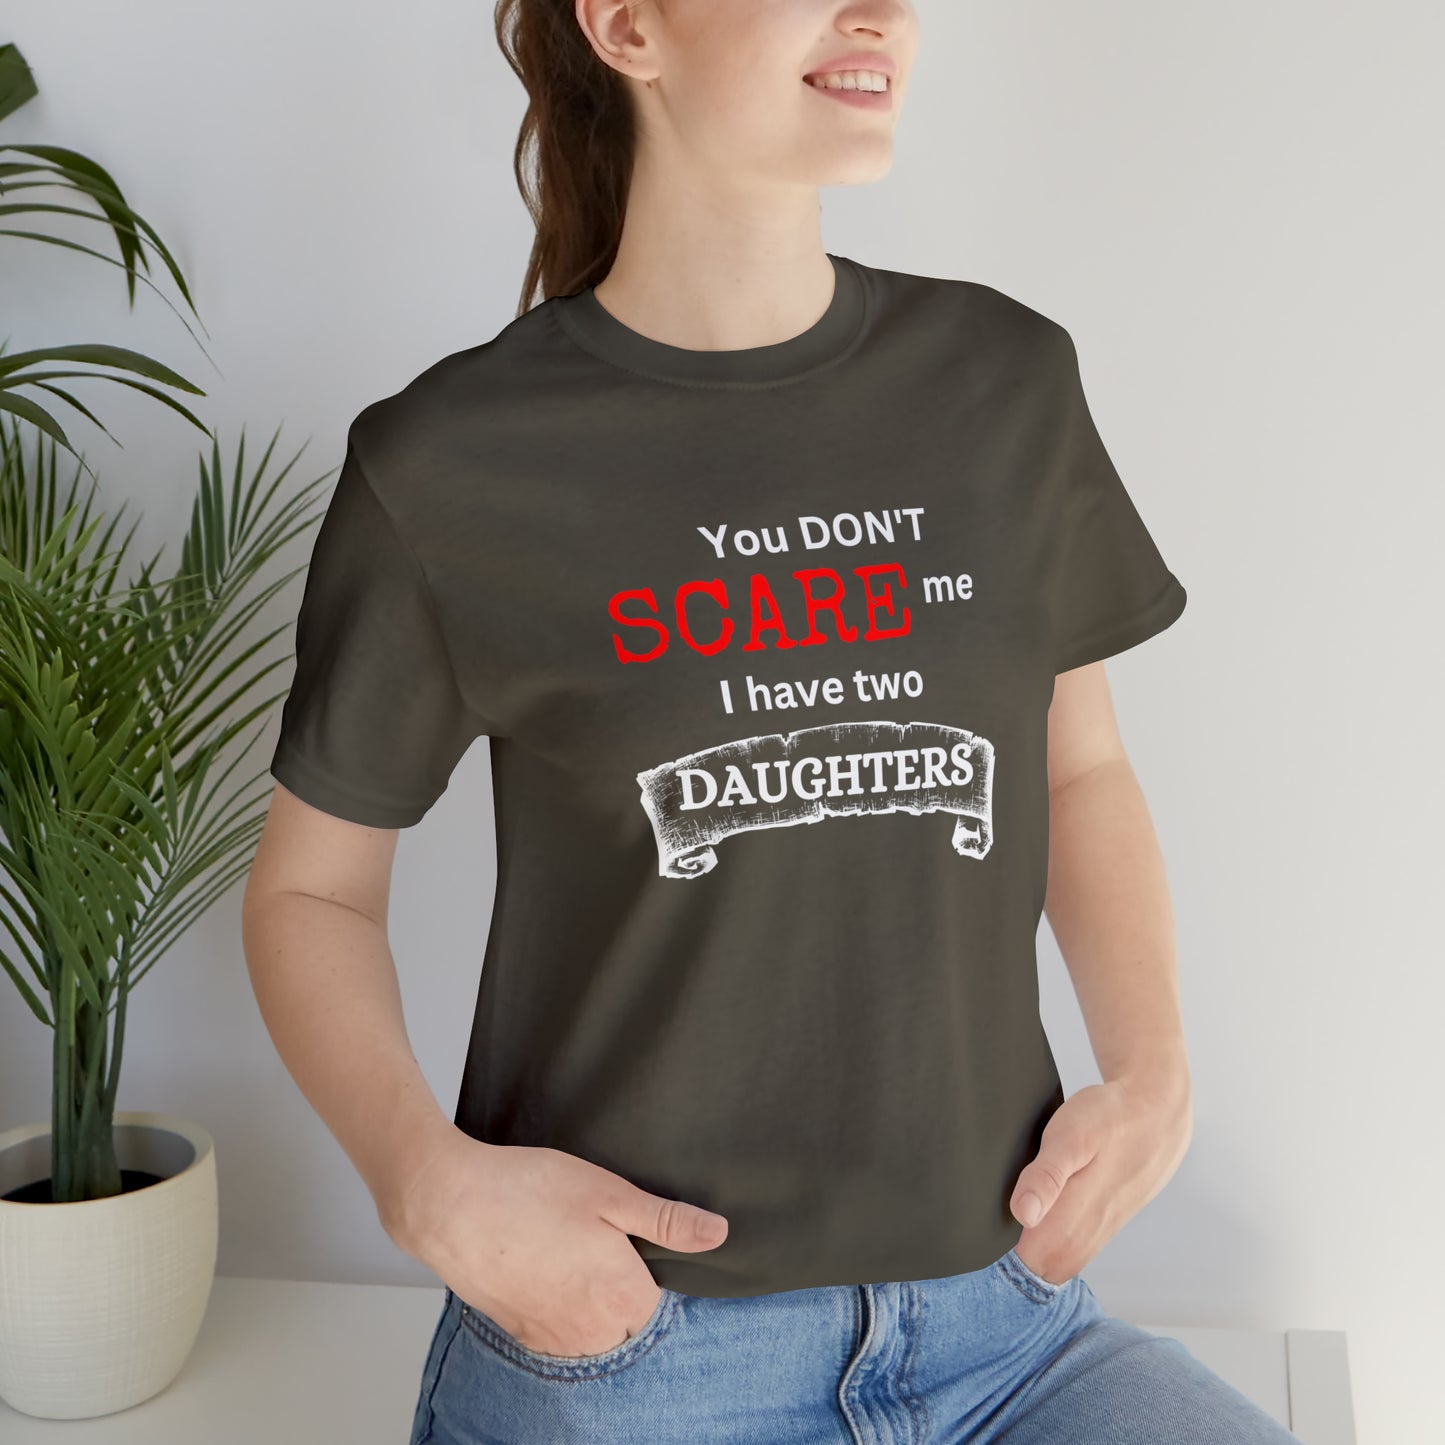 You Don't scare Me T-Shirt | Funny Dad T-shirt, Father's Day Gift, T-shirt For Dad, Husband T-shirt, Funny Men's Shirt